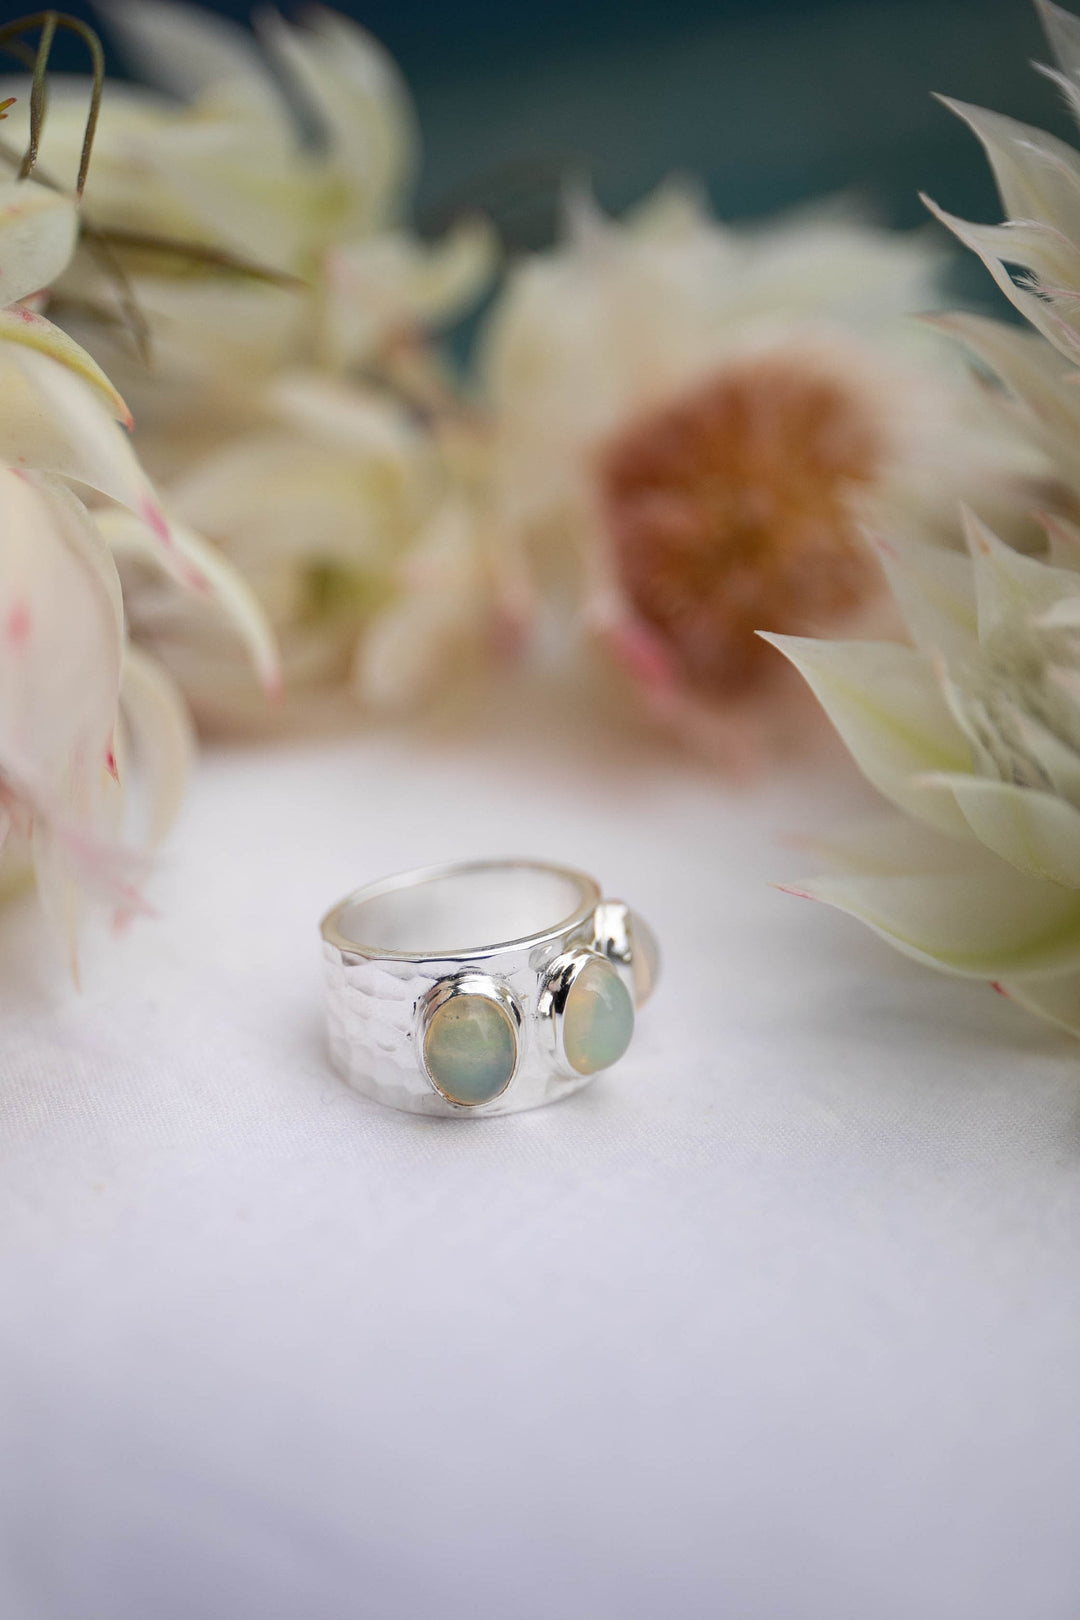 Reserved for MIMI** Triple Ethiopian Opal Ring set in Beaten Sterling Silver - Size 9 US